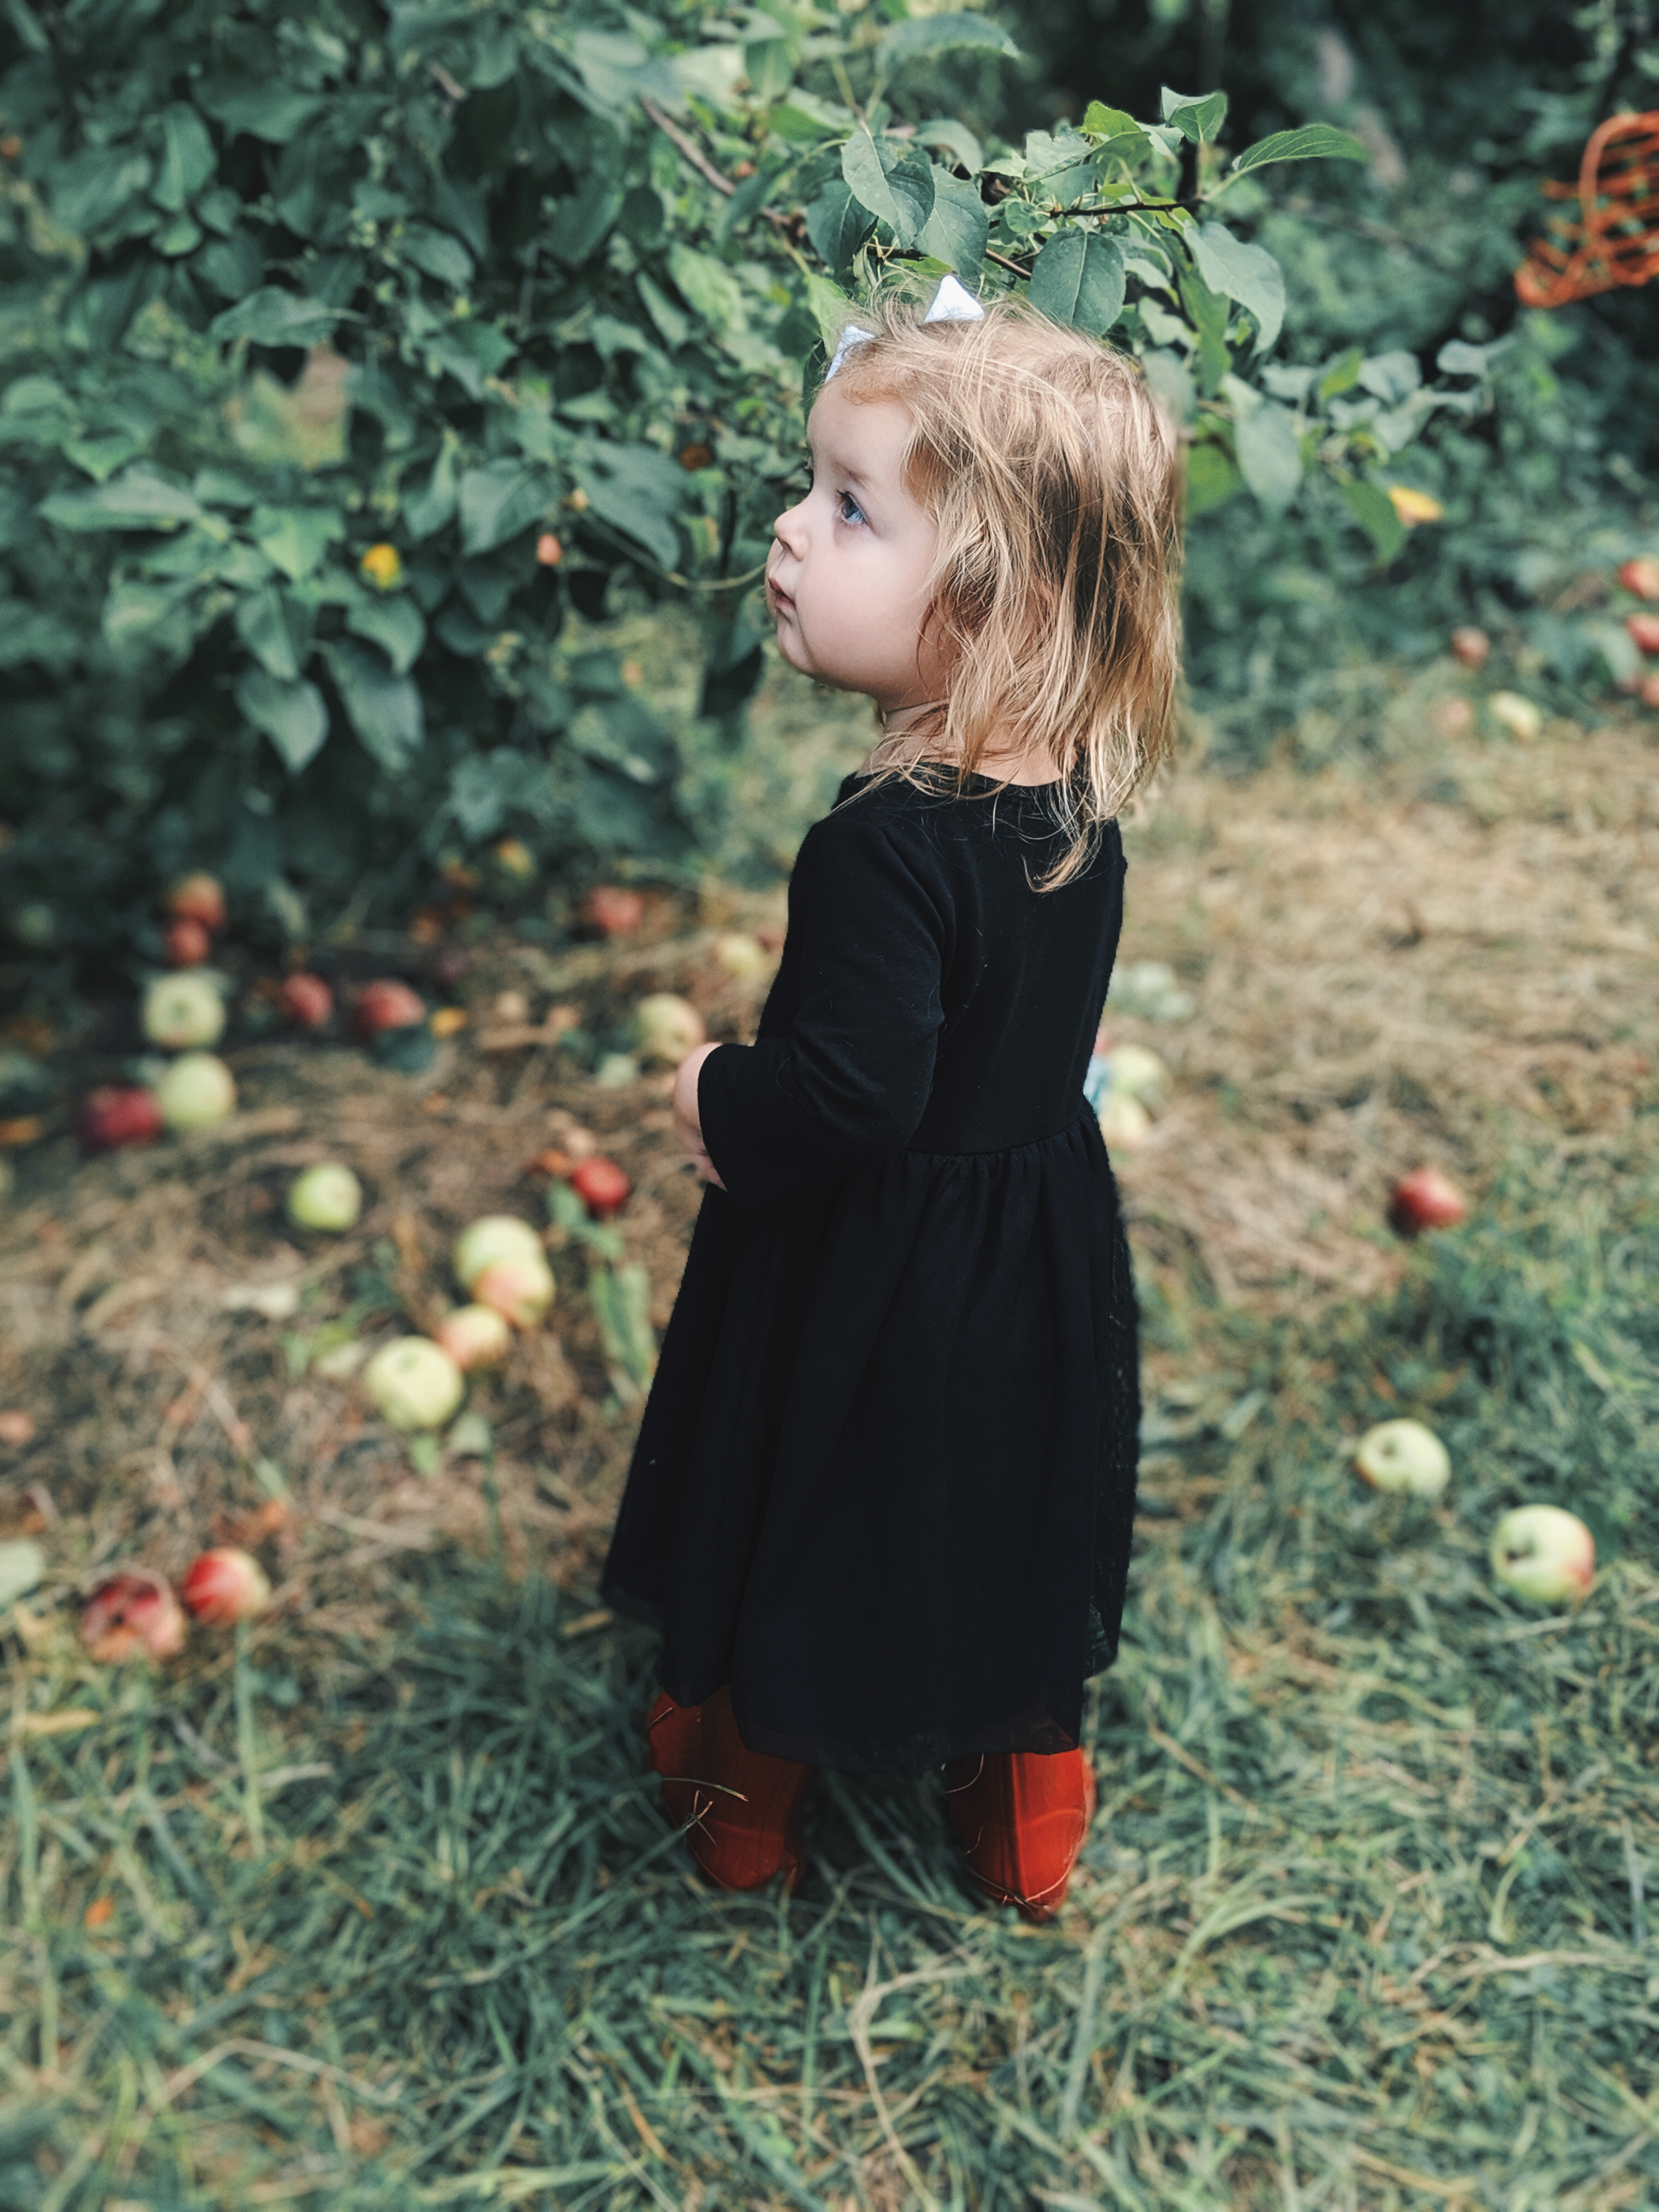 These apple picking photos are too cute! Going apple picking is one of our favorite fall family activities! Here's our apple picking outfits and our experience with apple picking Kansas City at Cider Hill Family Orchard! A great family activity in Kansas City! #applepicking #fallactivities #fall2019 